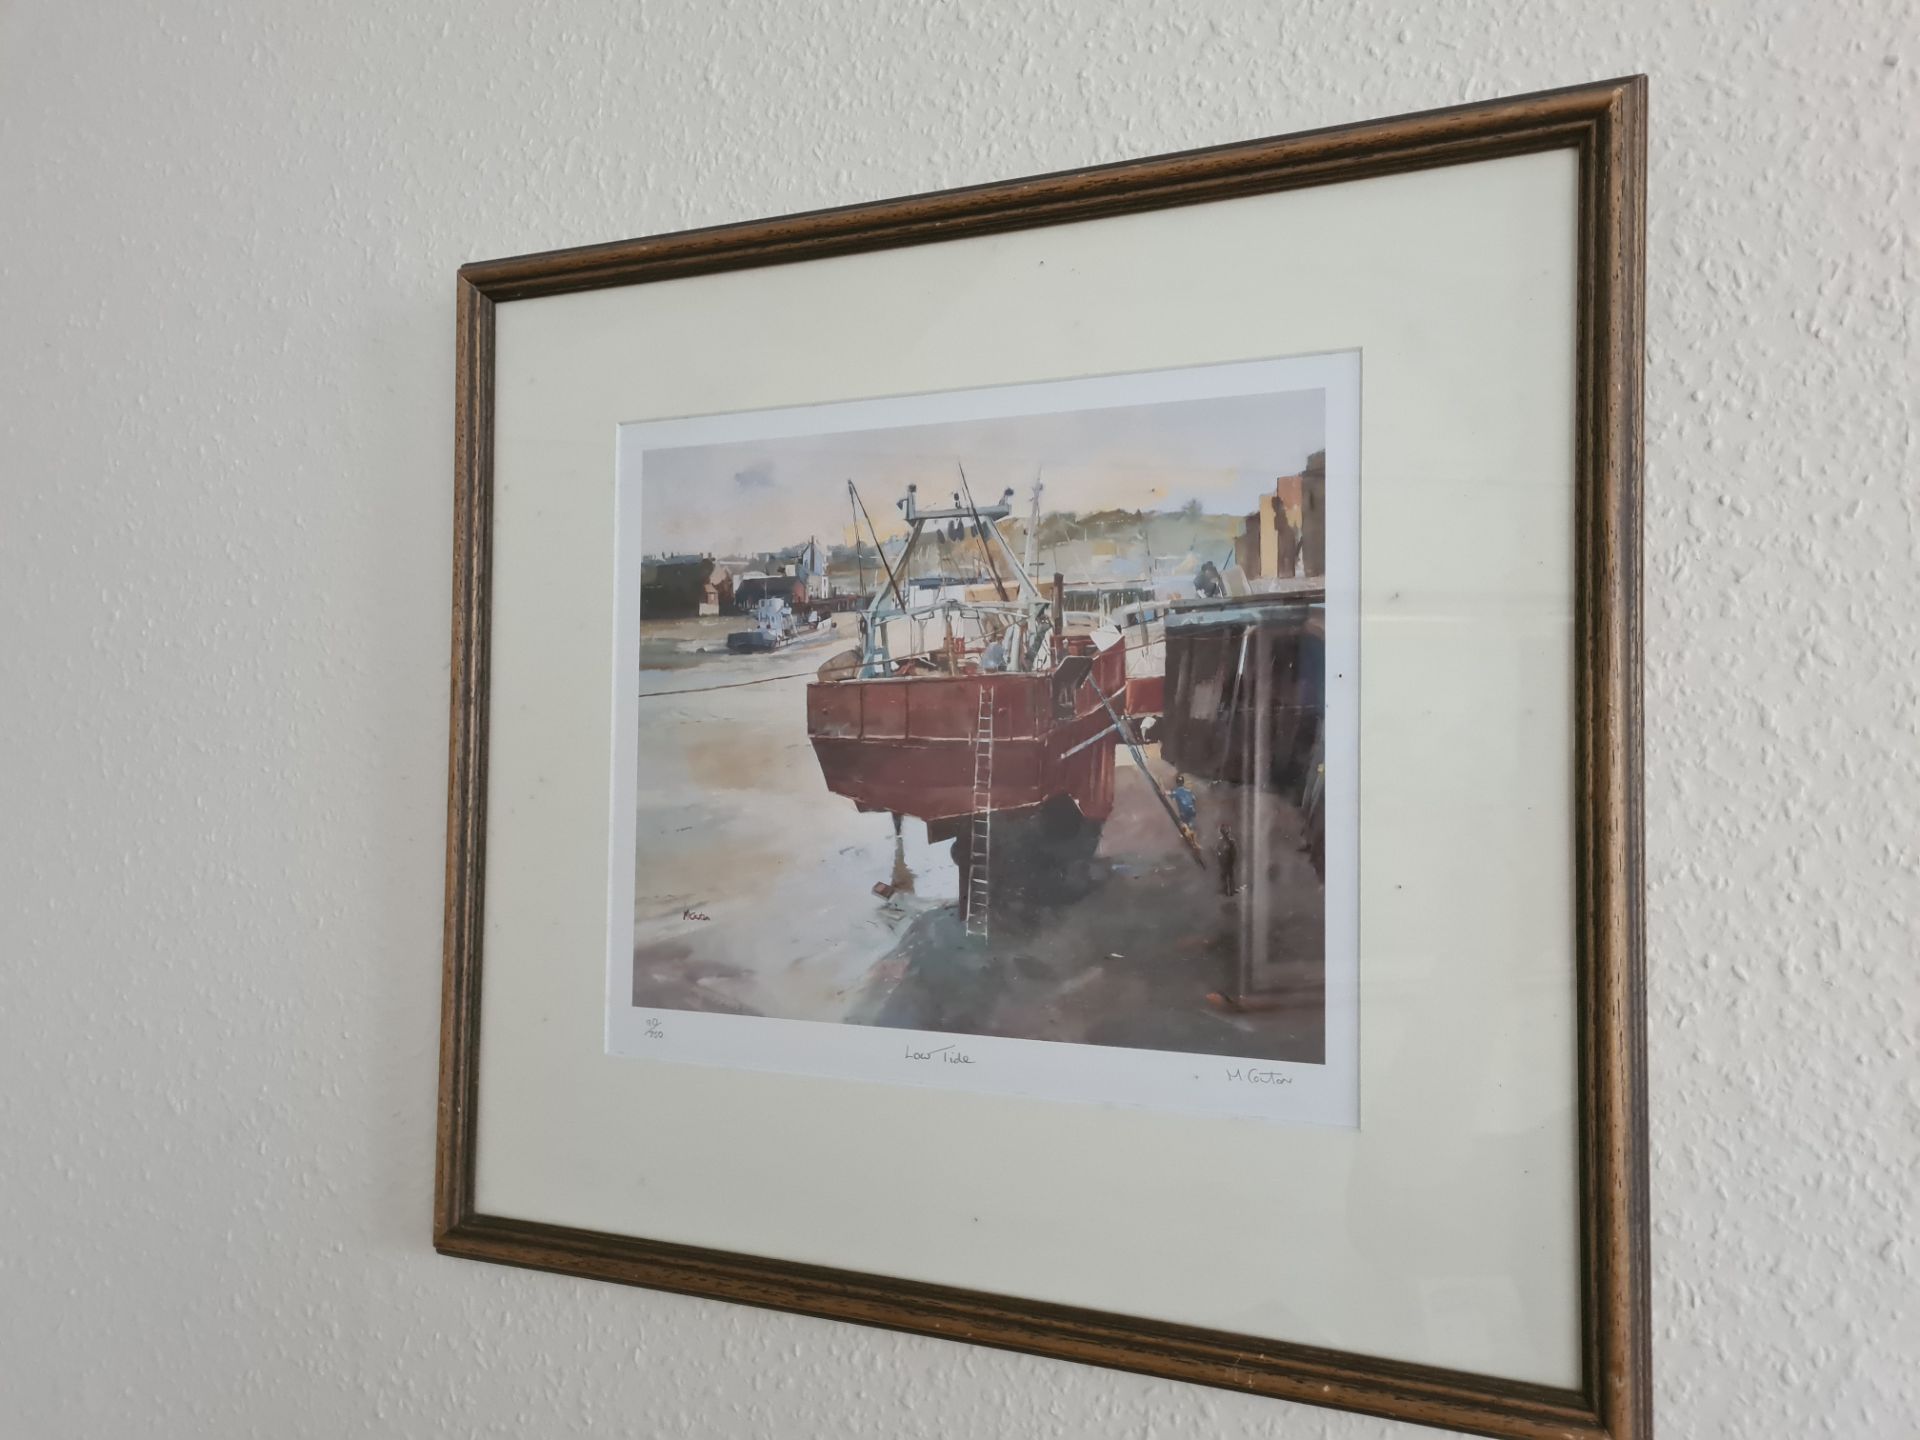 Signed Titled Framed Limited Edition Print ' Low Tide' (9/750), by M Cowton, 20" x 18"